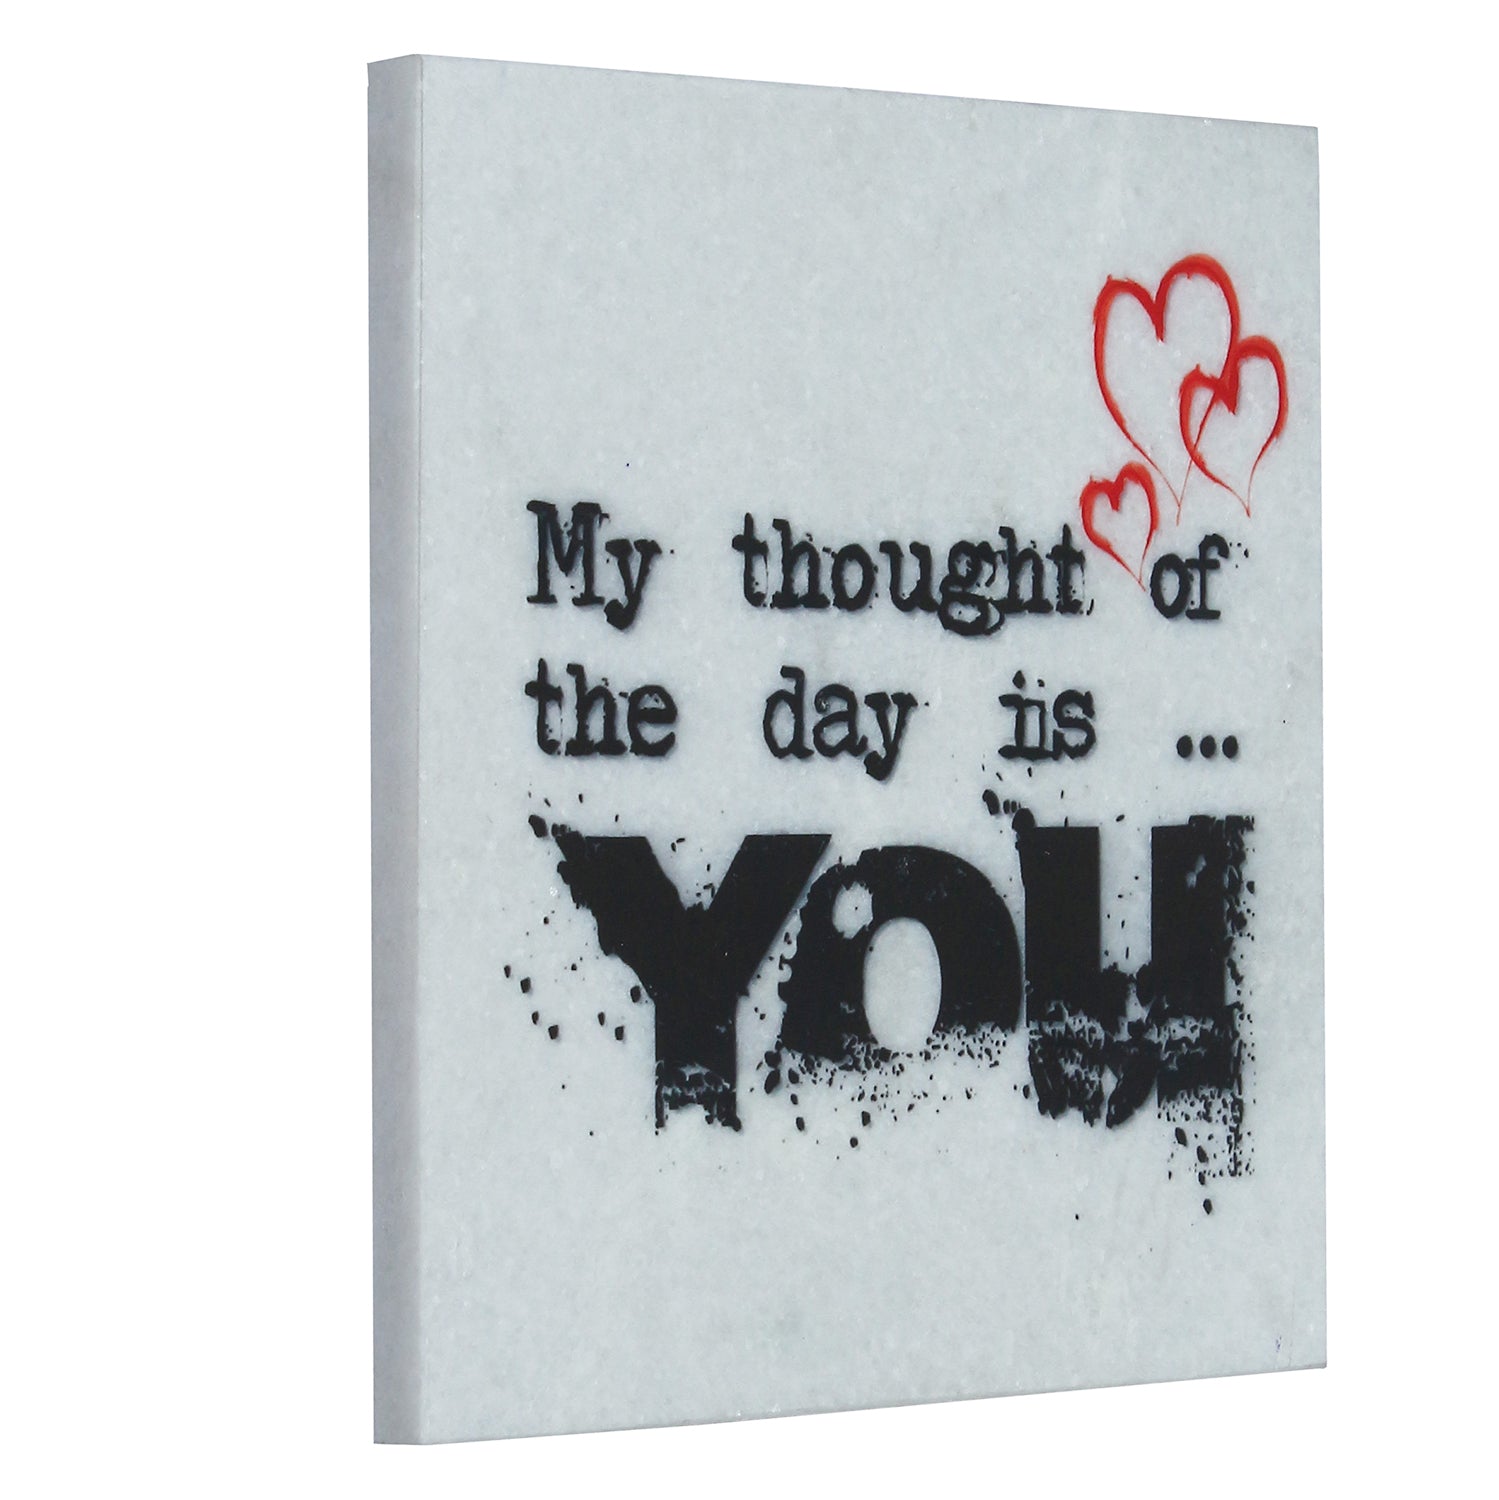 "My thought of the day is YOU" Quotation Painting On Marble Square Tile 3